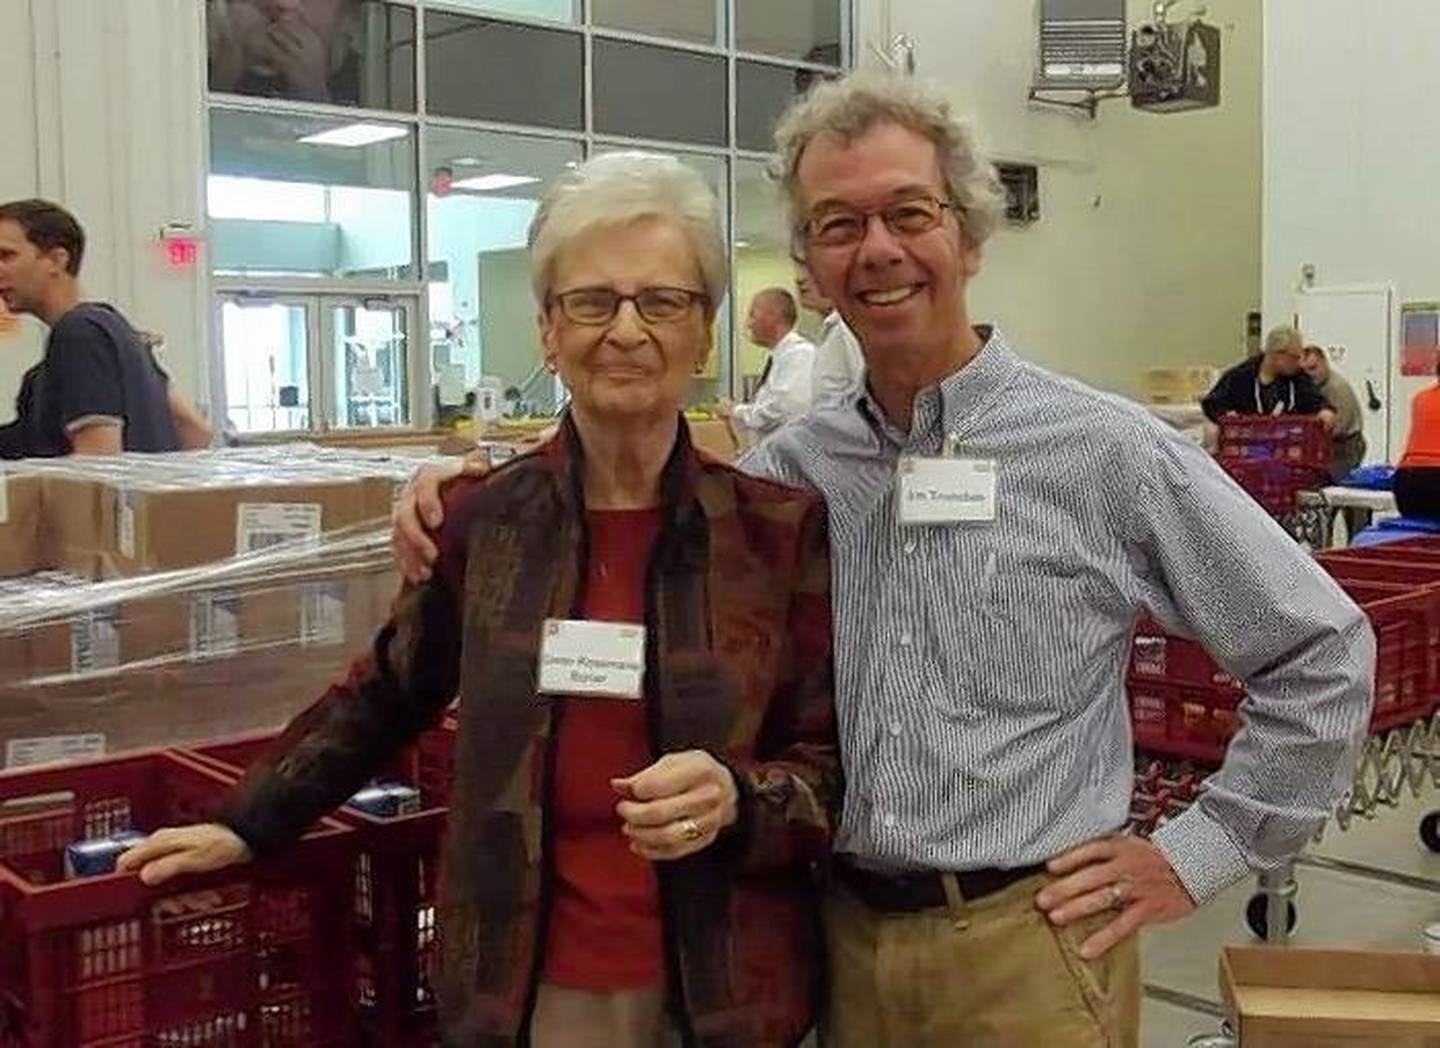 Sister Rosemarie Burian appears at the Northern Illinois Food Bank in 2013 with Jim Truesdale, the chairman of the food bank's first board of directors. - Courtesy of Northern Illinois Food Bank